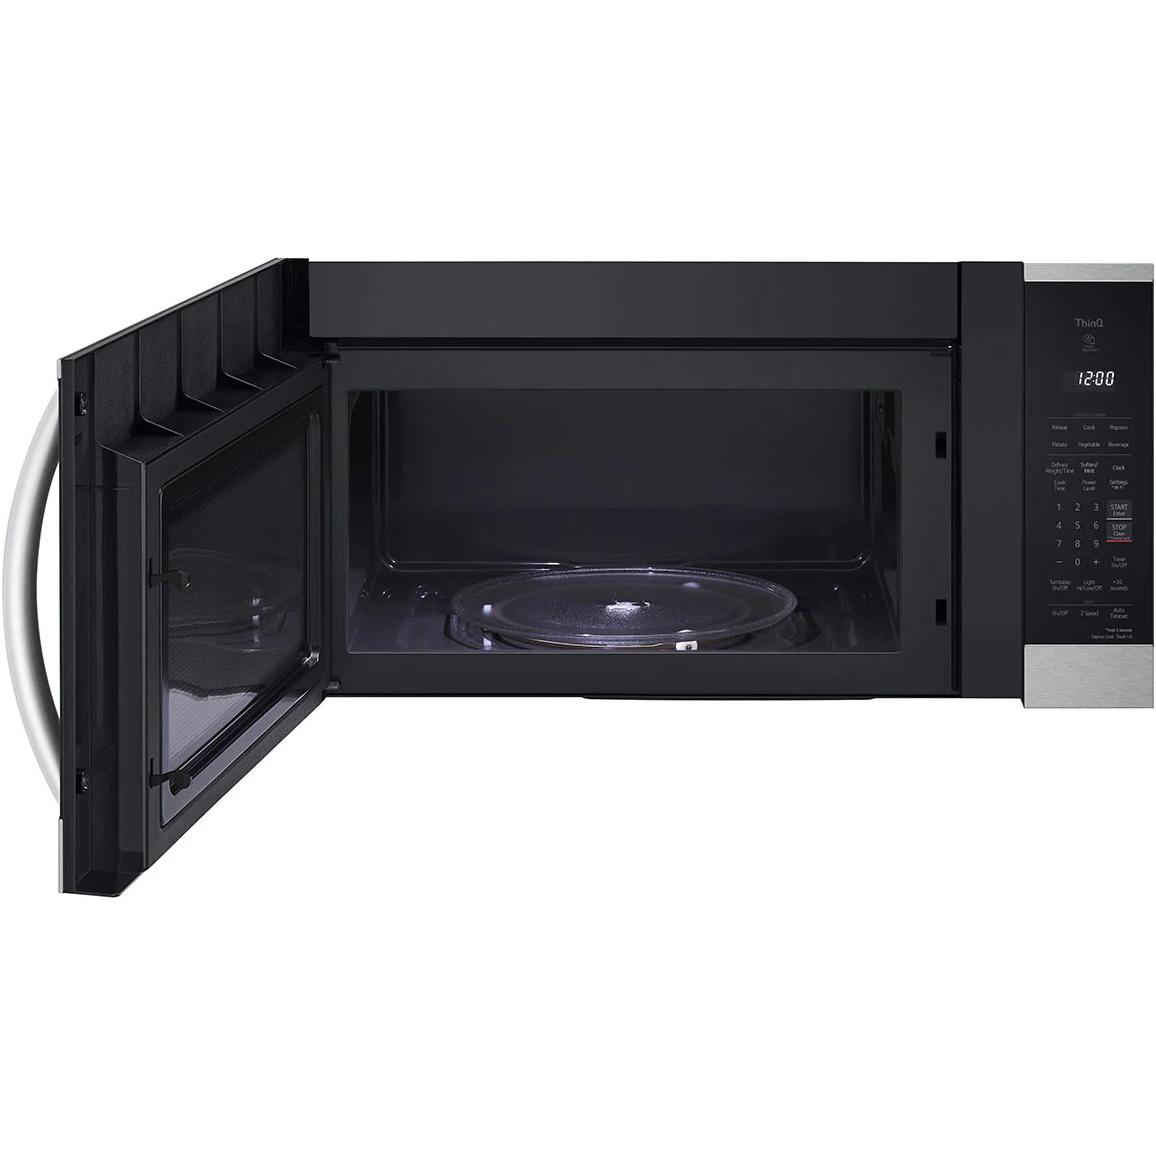 LG 30-inch 1.8 cu. ft. Over-the-Range Microwave Oven with EasyClean? MVEM1825F